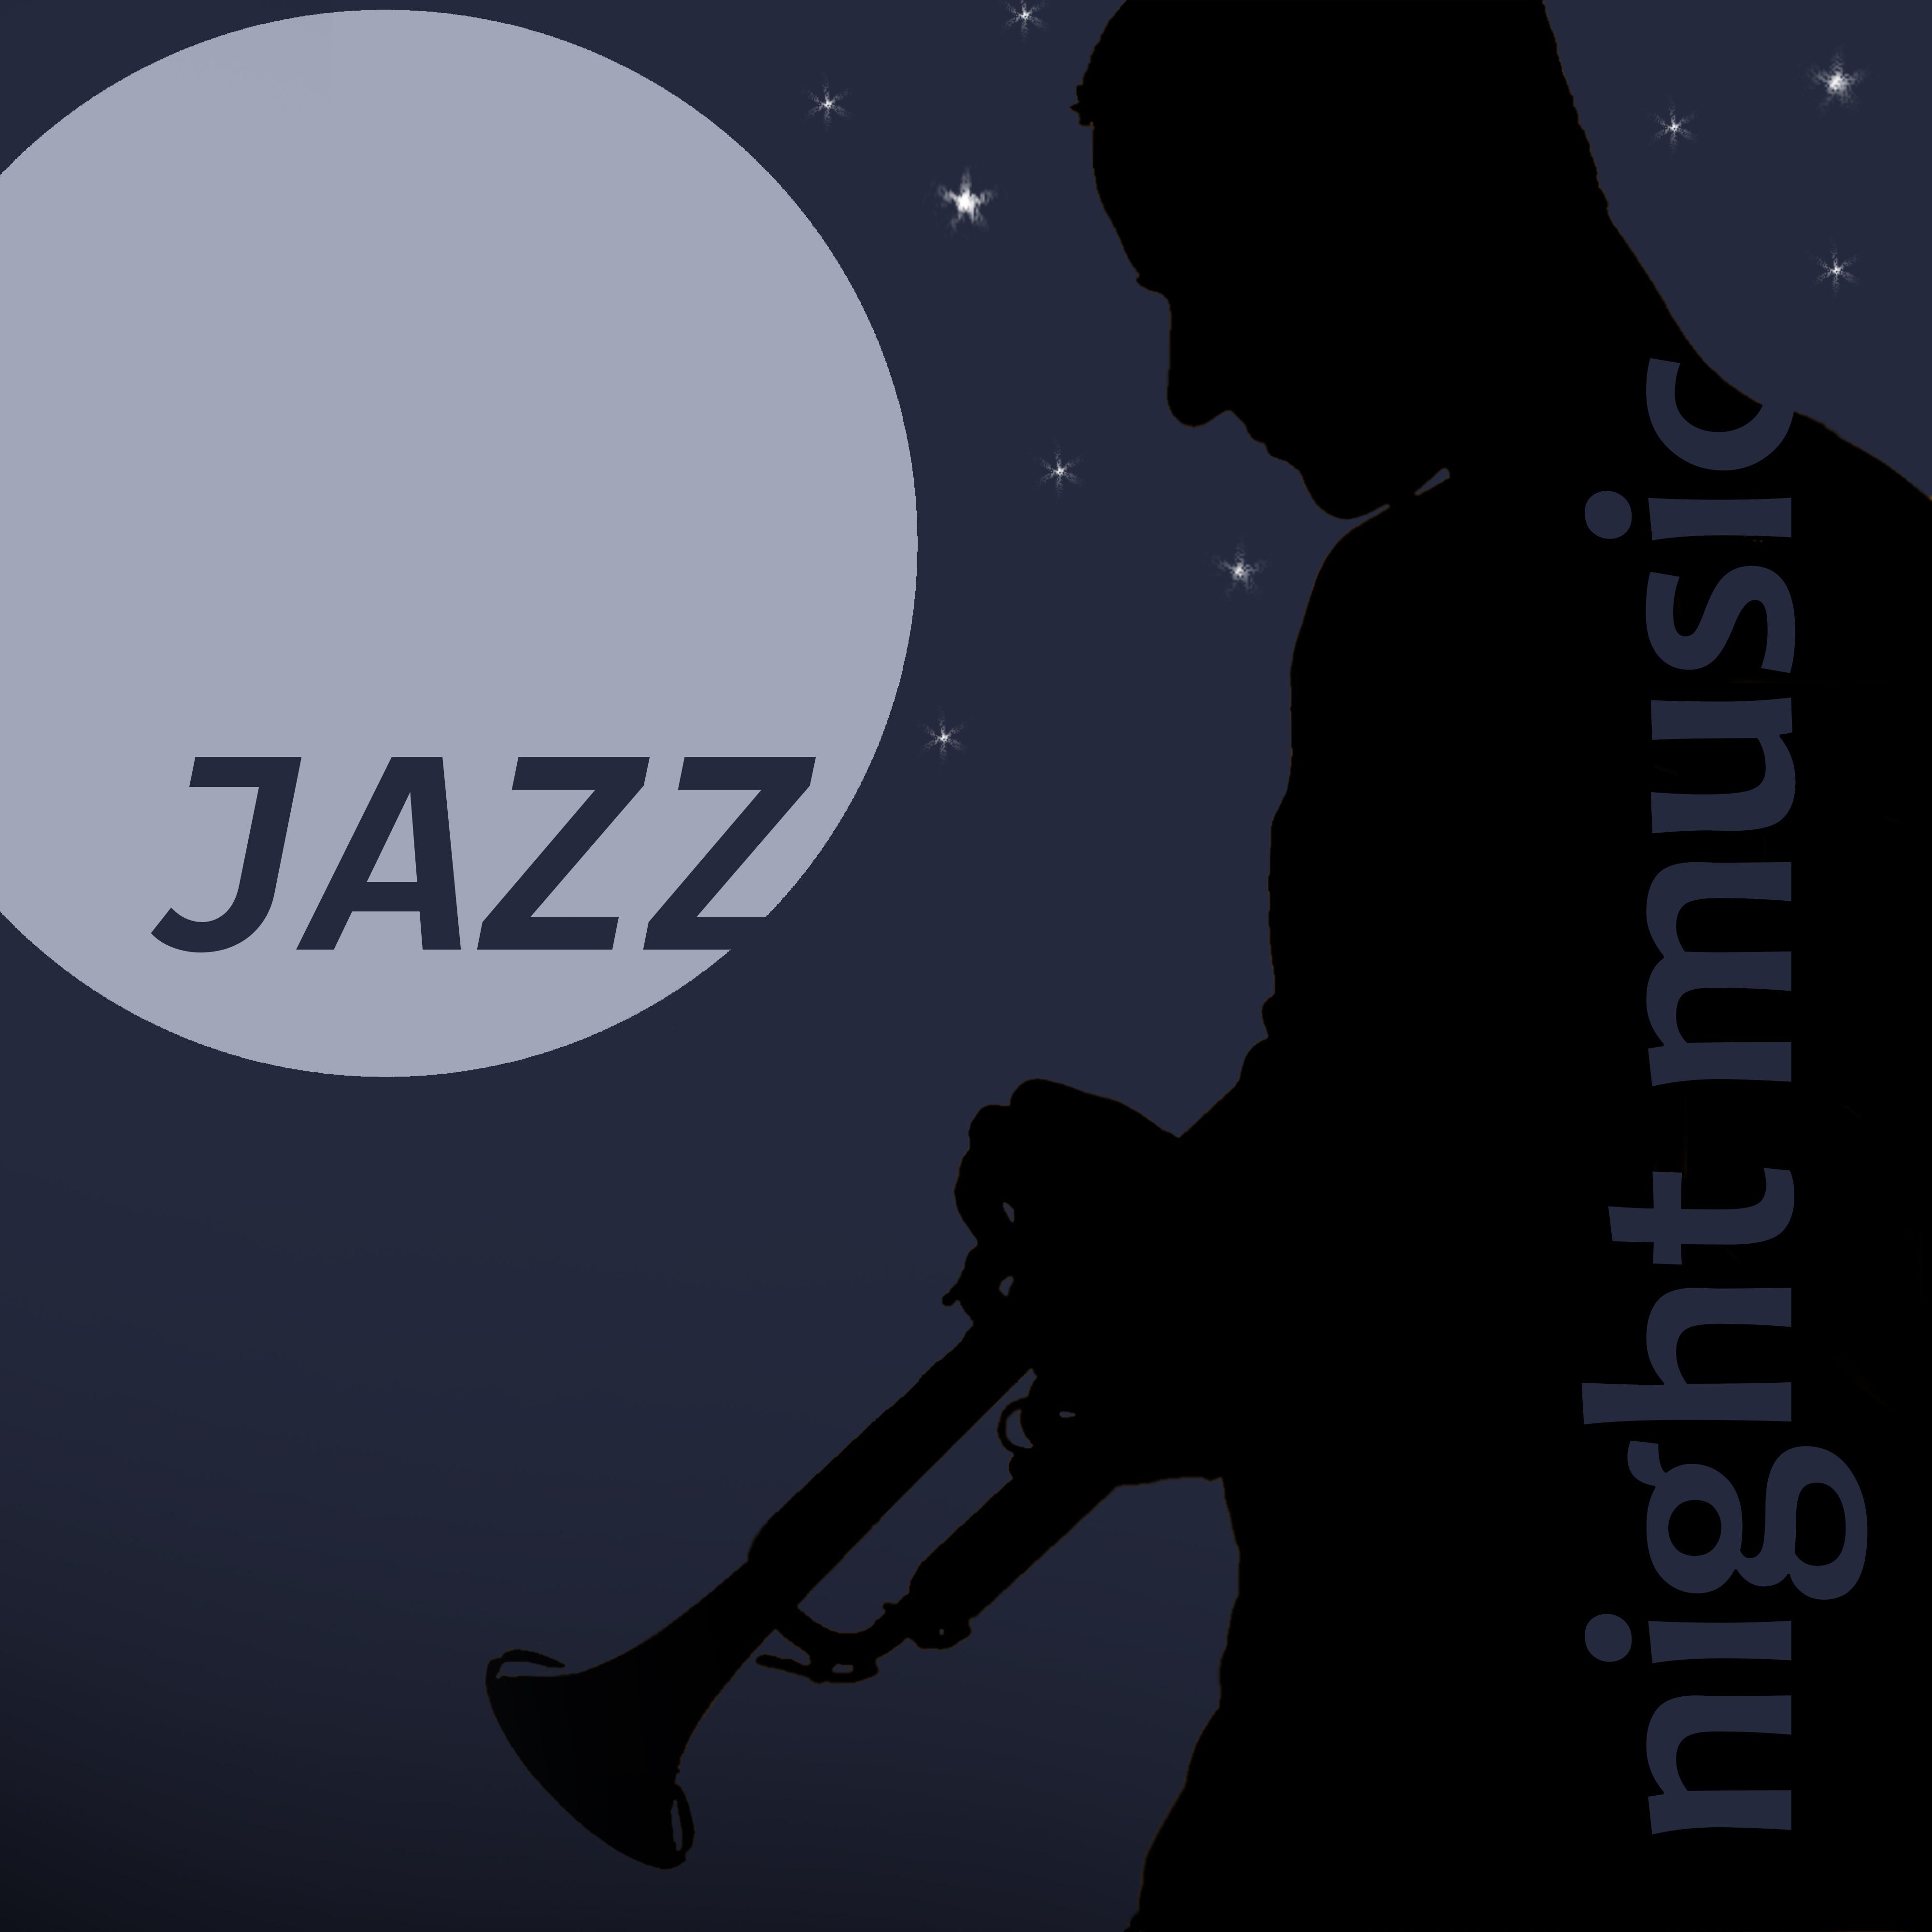 Collection музыка. Music collection. Jazz Music collection. Night Jazz Music album. Логотип Soothing Music.